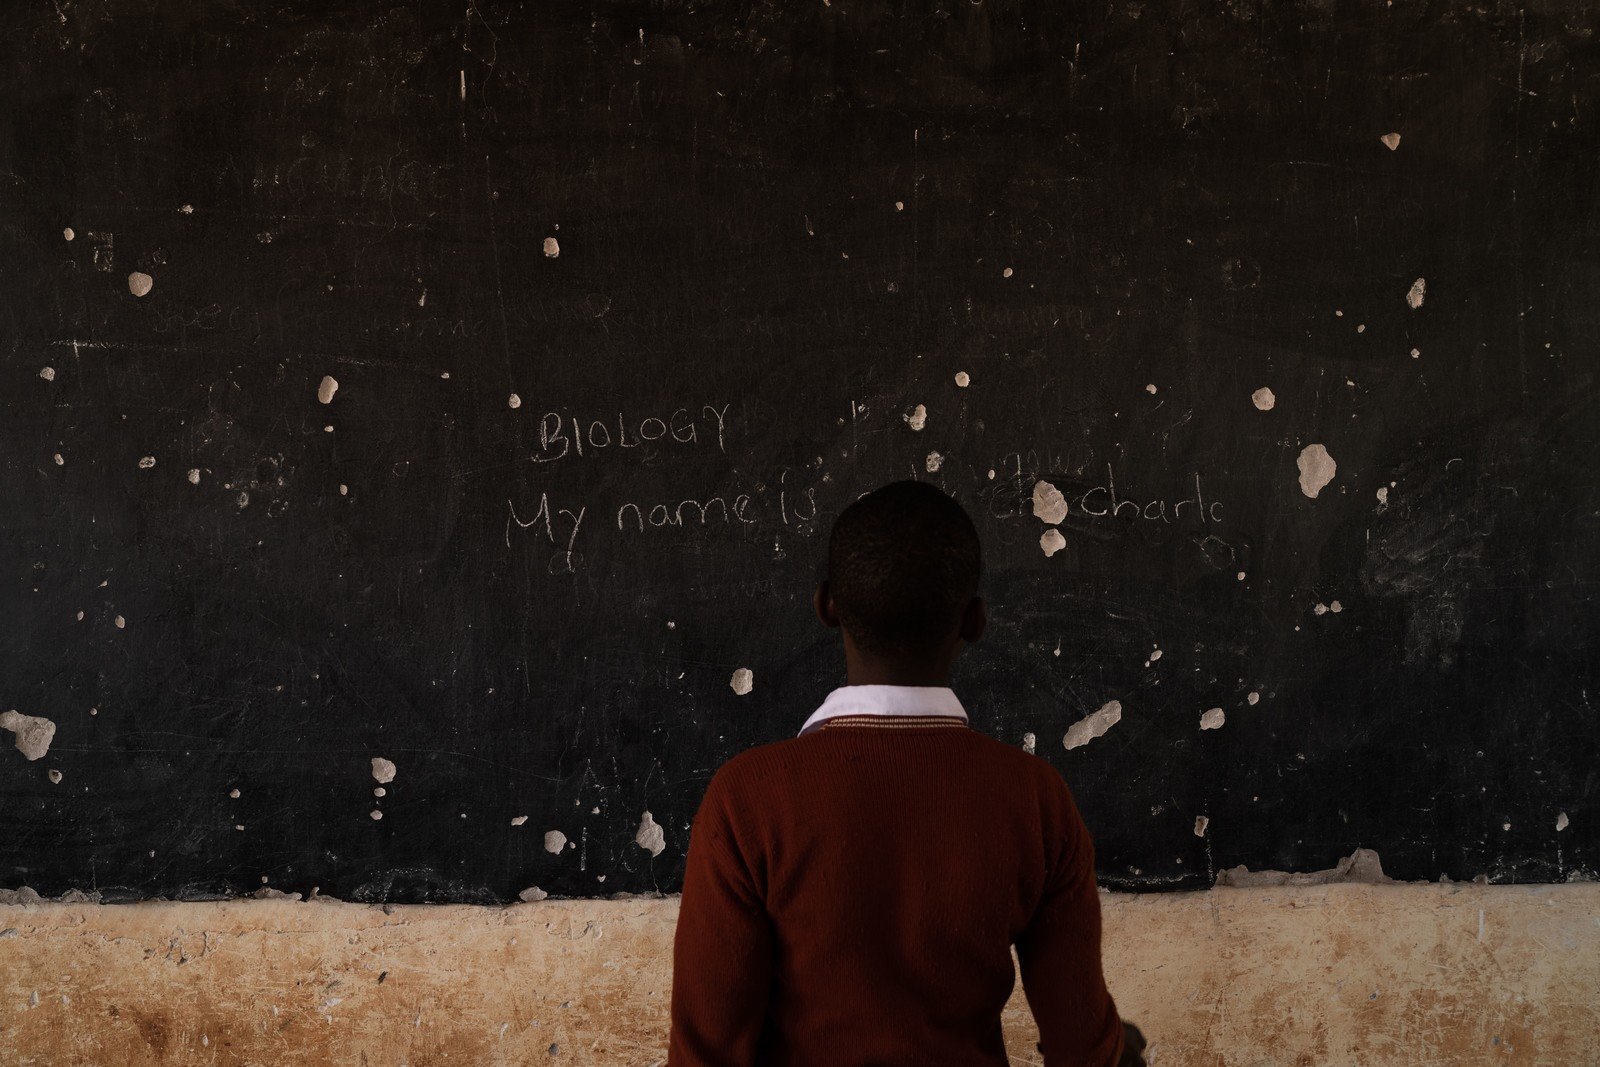 This blackboard had small holes all over it. A student shared her simple wish: ‘I hope to have a new blackboard.’